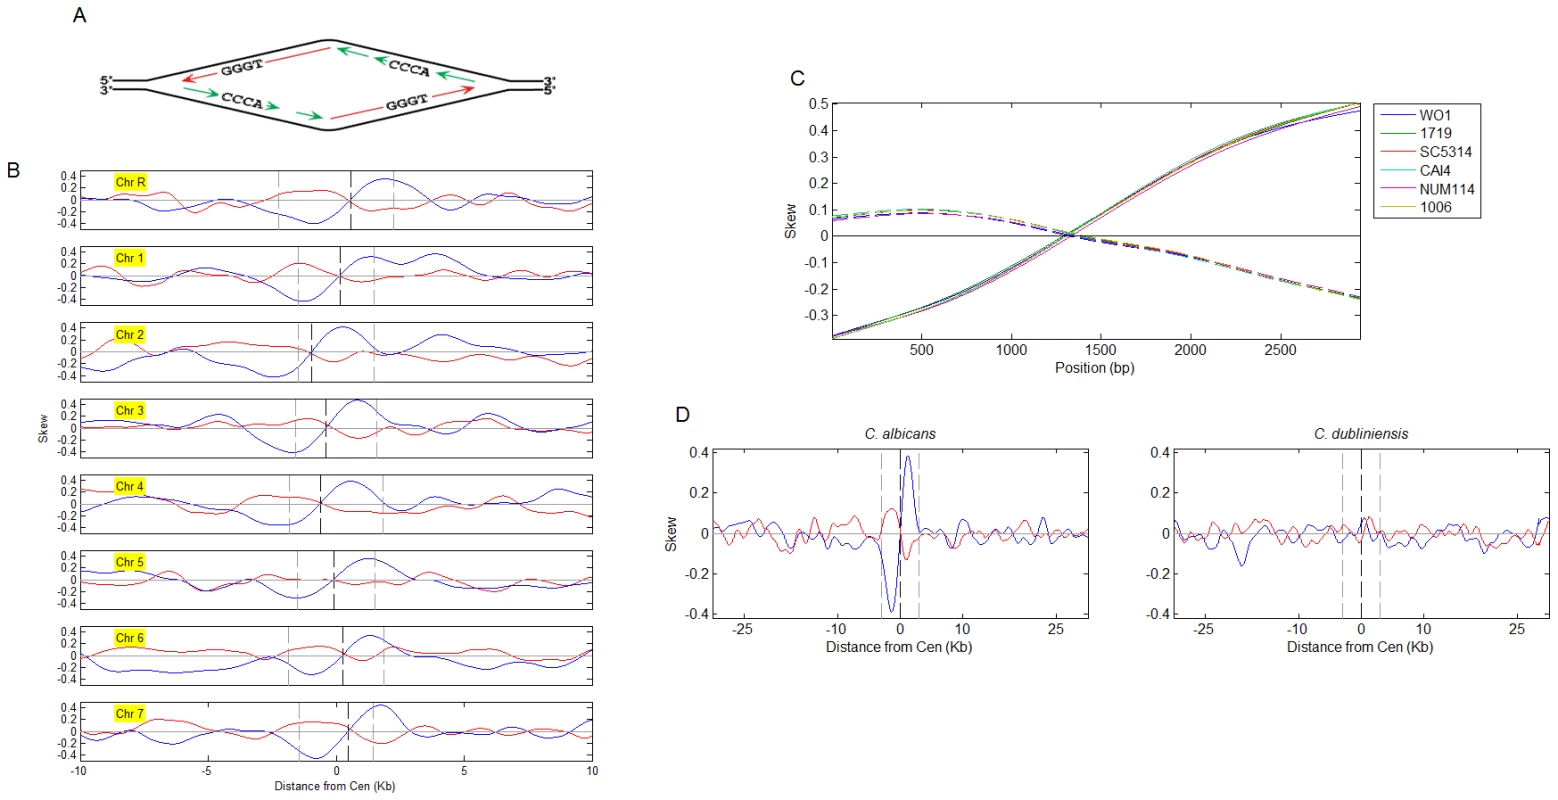 Nucleotide skew patterns and their correlation to syntenic conservation of centromere position.